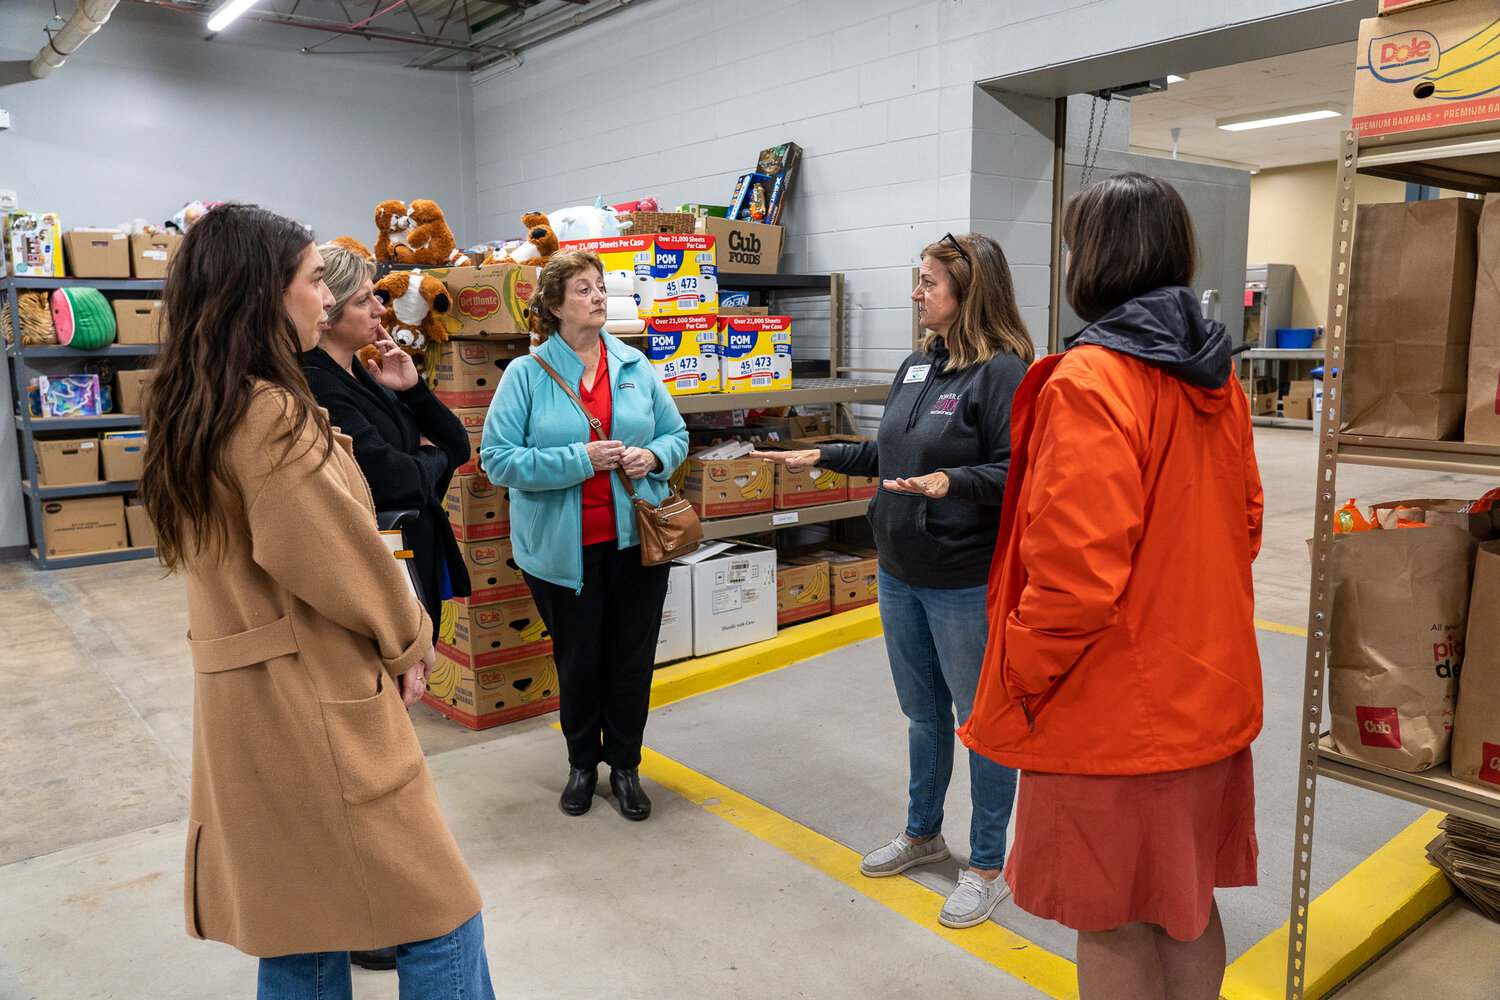 Part of the group received a tour of the expanded storage and sorting area at Hastings Family Service. L to R Jayme Harlander, Christina Taylor-Haley, Janet Bremer, Amy Sutton and Tara Tommes.